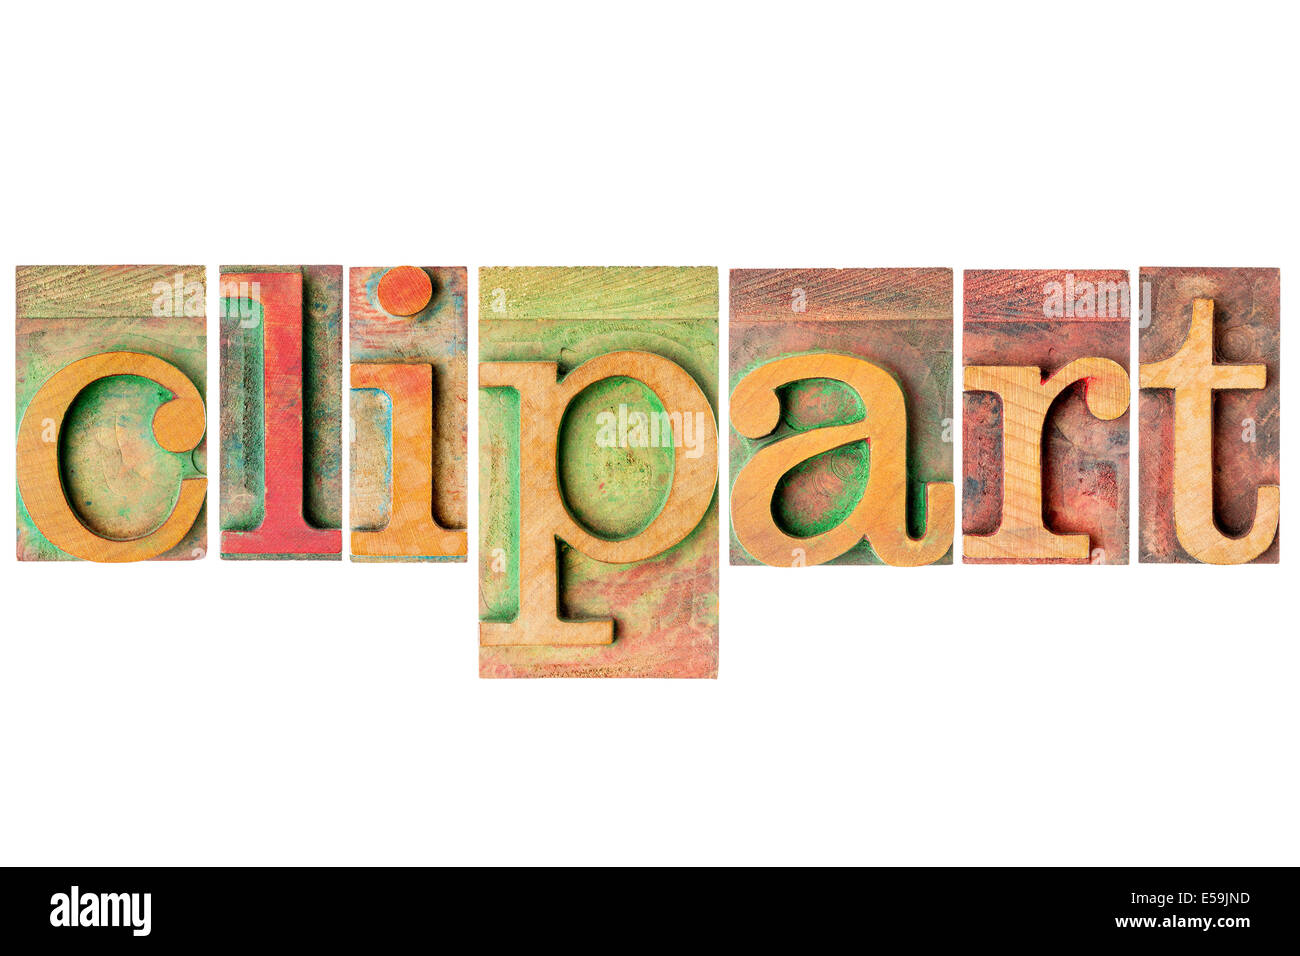 clipart  word - a collage of isolated letterpress wood type printing blocks Stock Photo